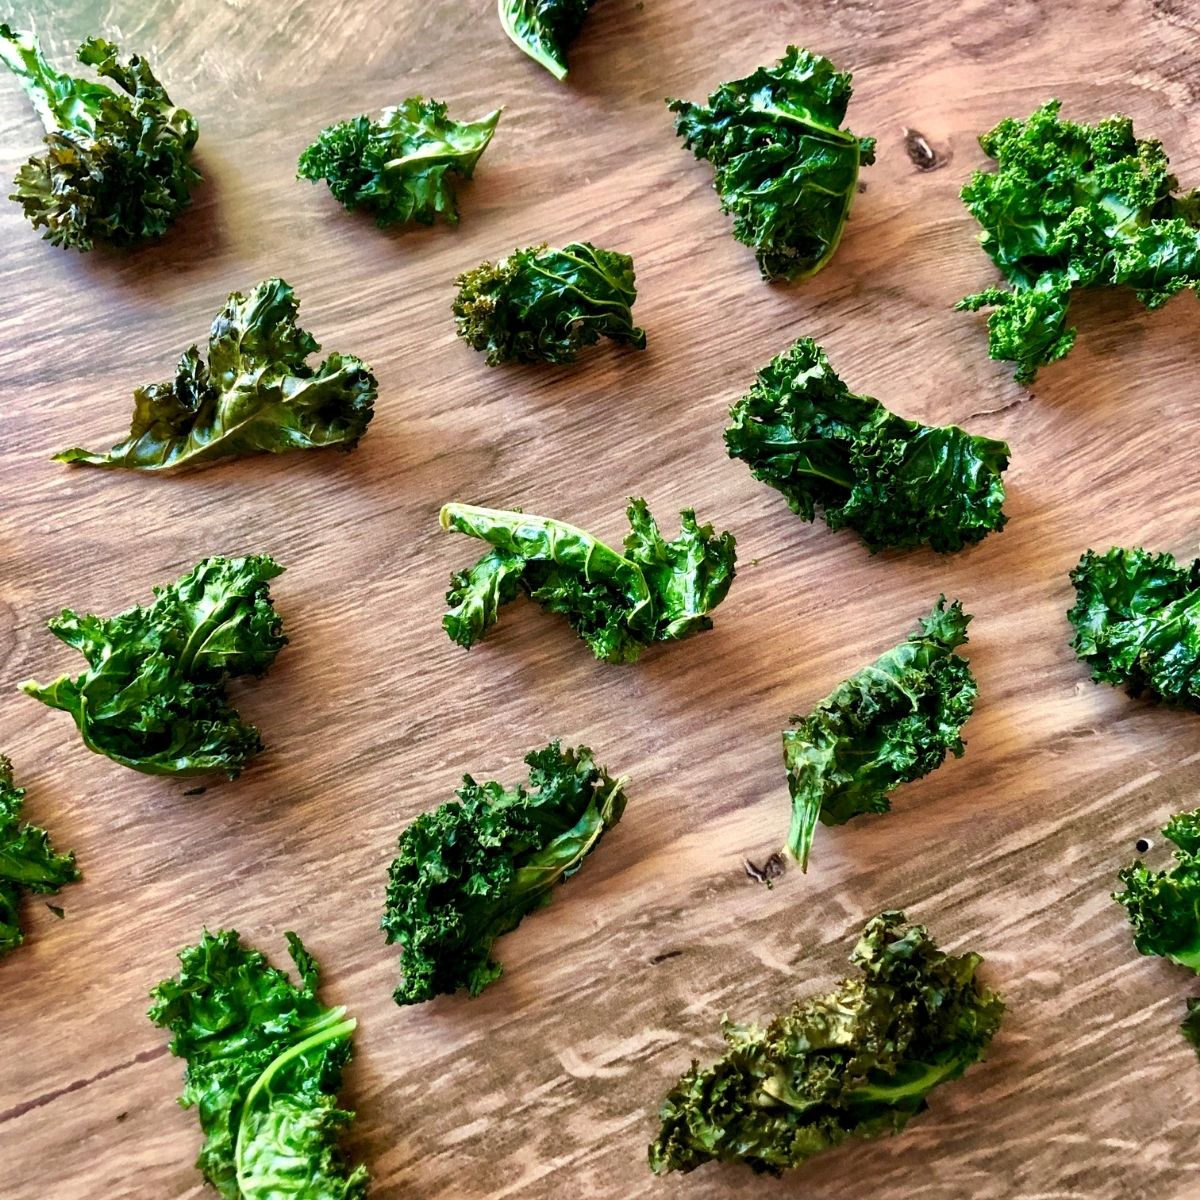 scattered cooked kale chips on a wooden table.